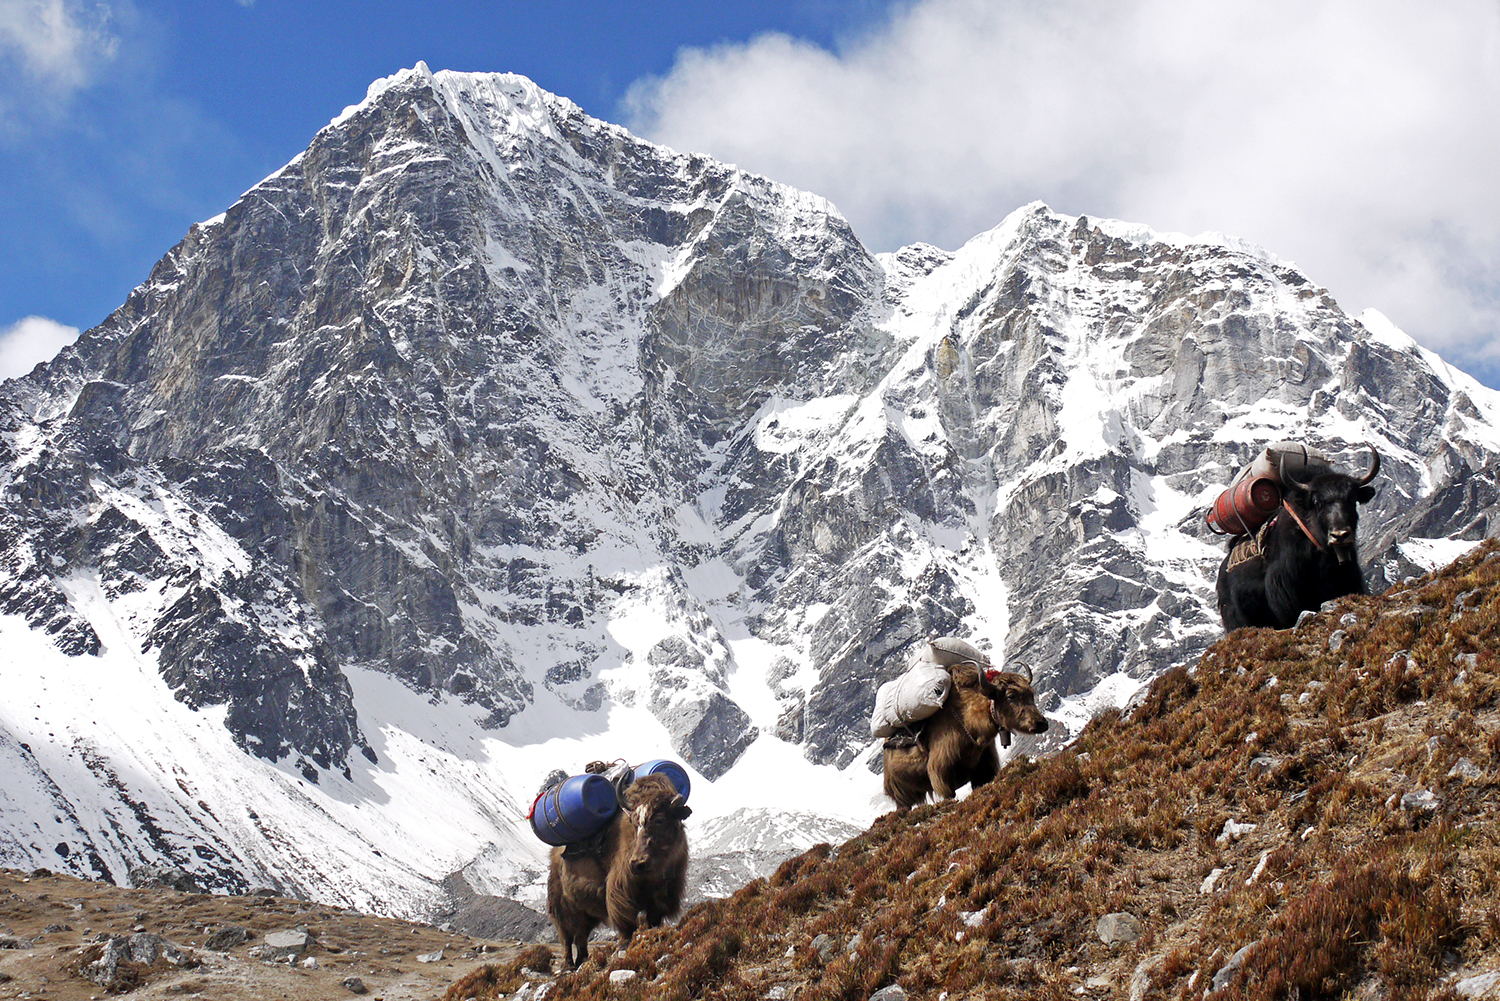 Three yaks stop for a rest en route to Everest Base Camp